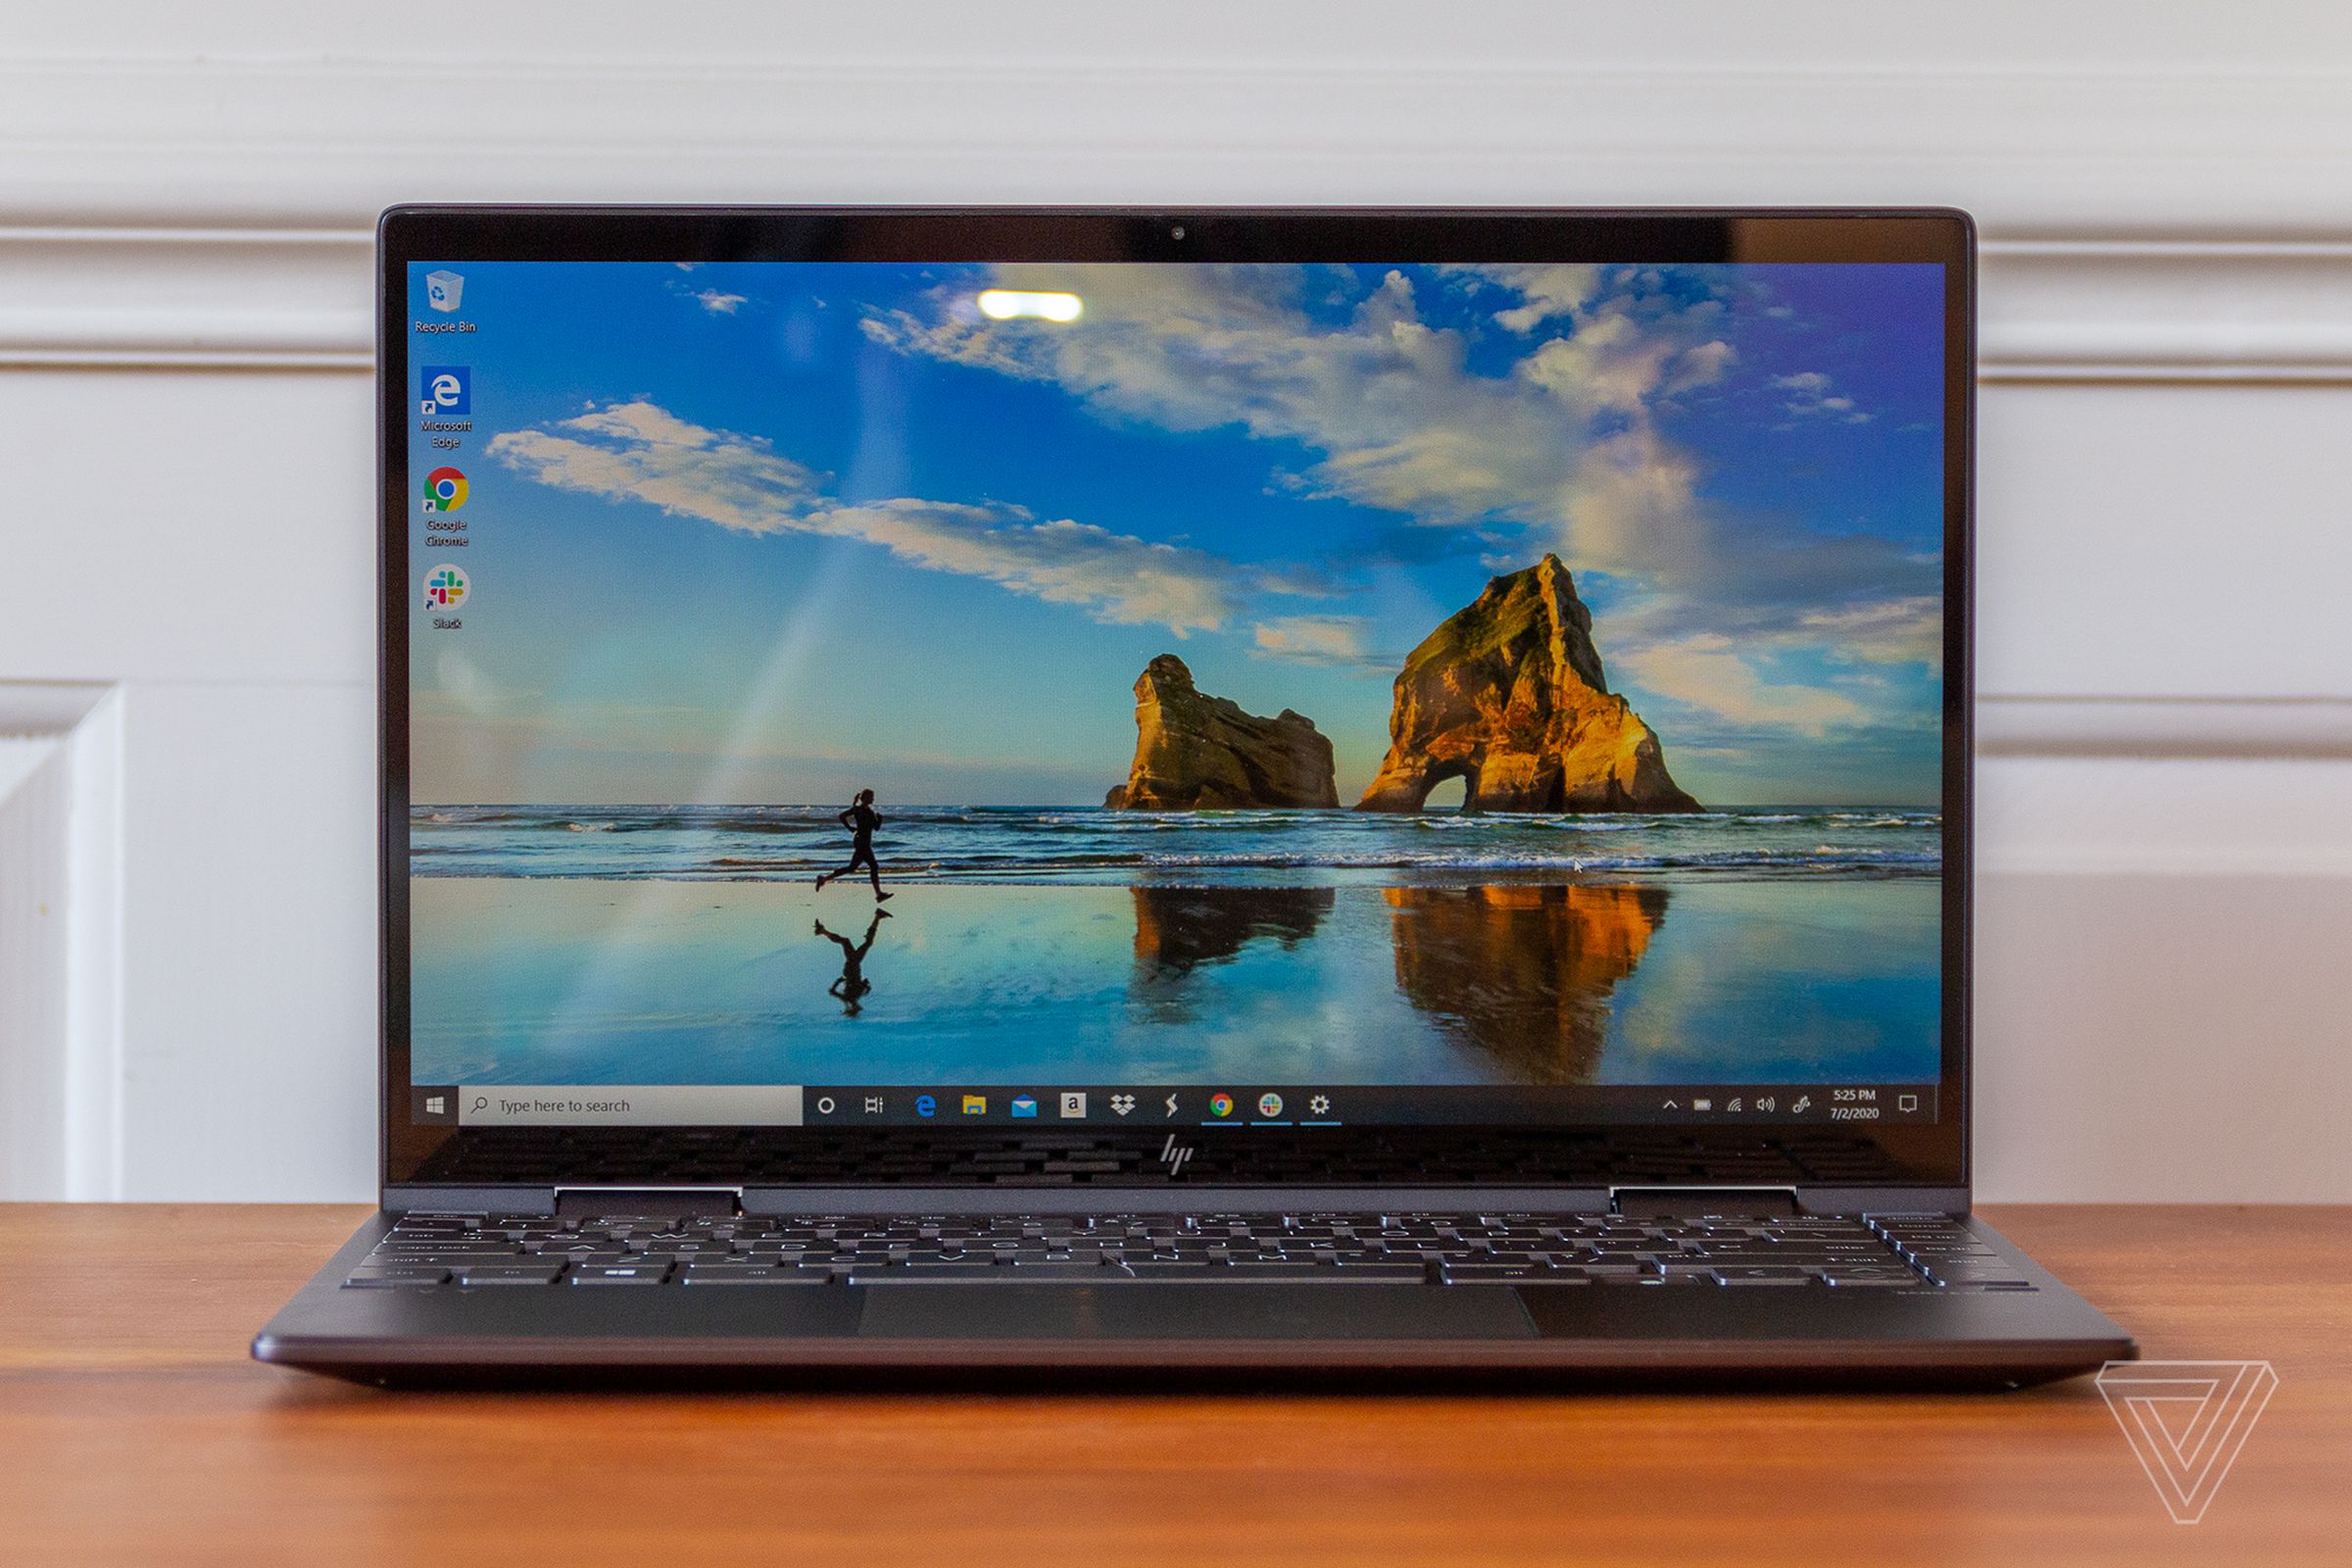 The HP Envy x360 is one of our favorite 2-in-1 laptops.